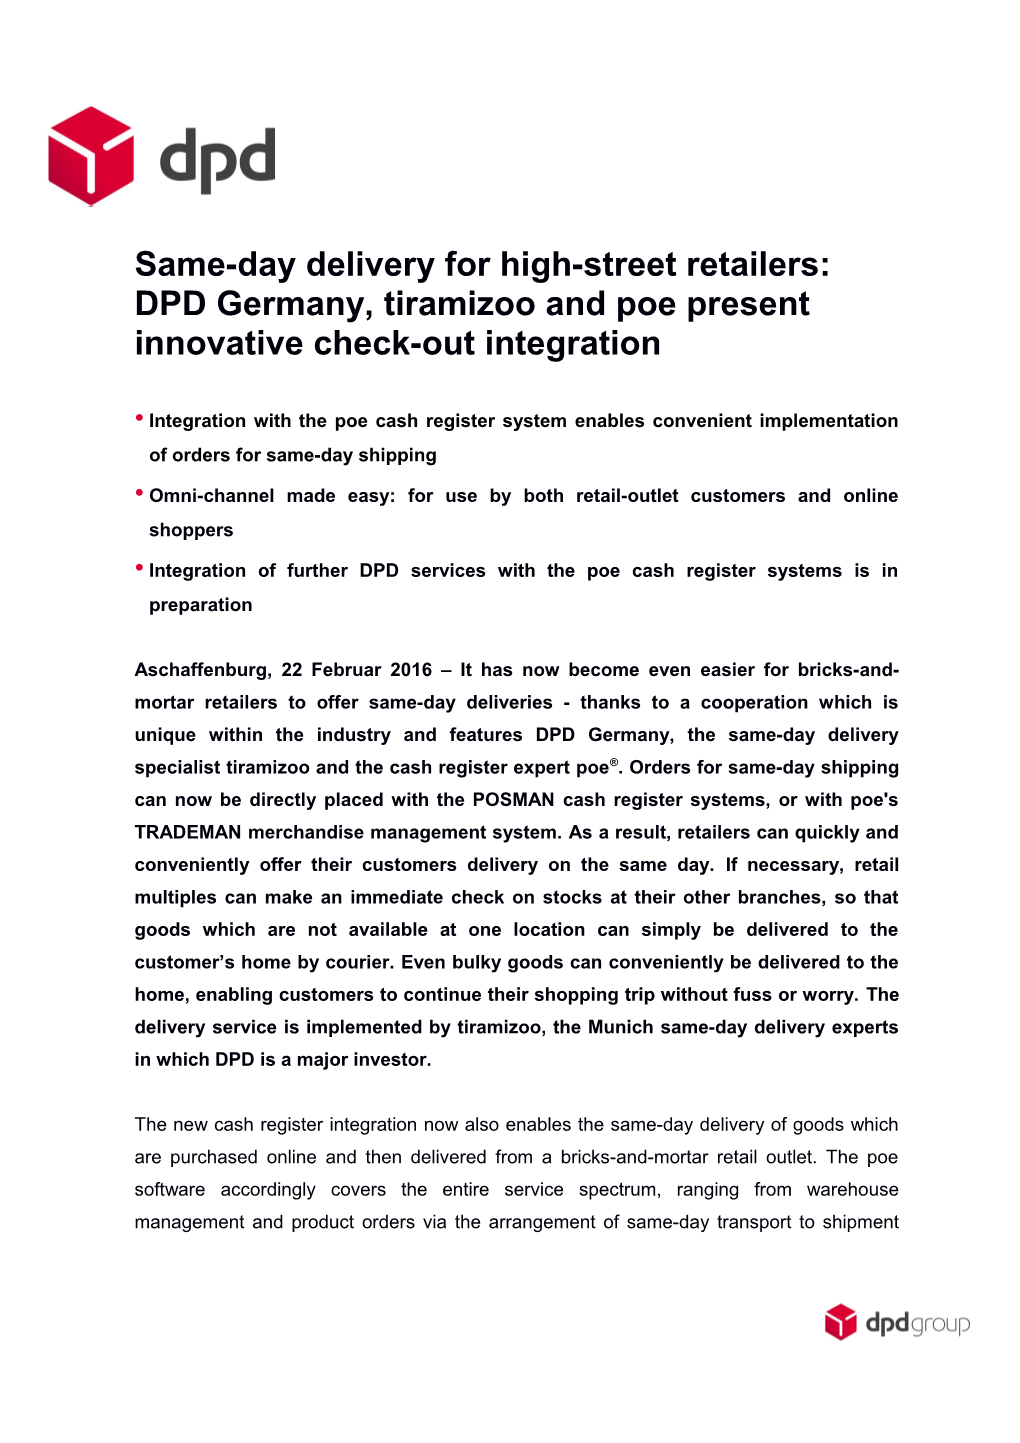 Same-Day Delivery for High-Street Retailers: DPD Germany, Tiramizoo and Poe Present Innovative